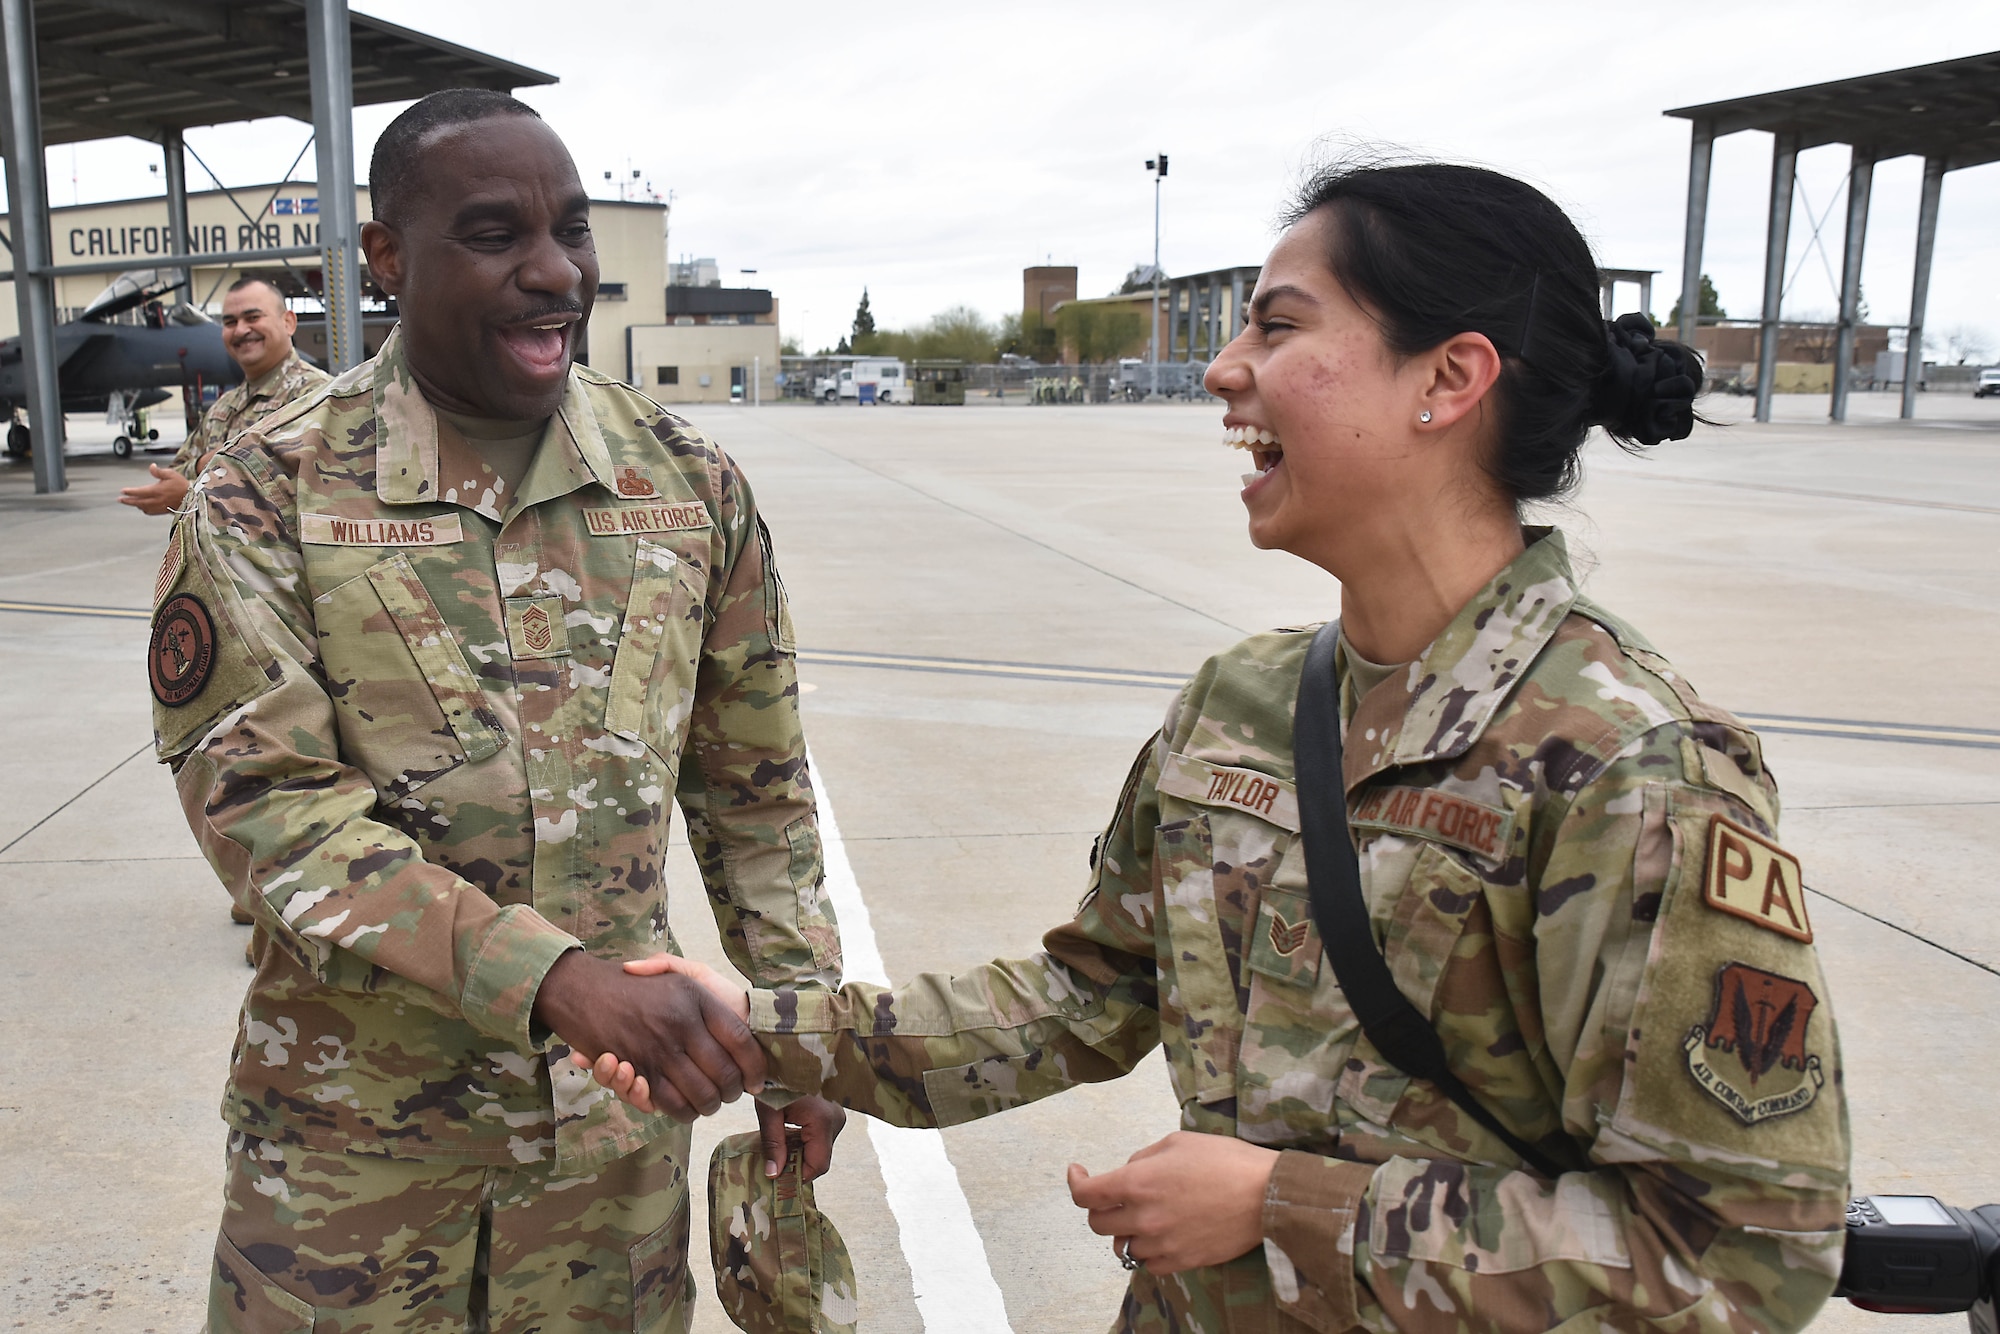 A man and a woman wearing green camouflage uniforms laugh while shaking hands